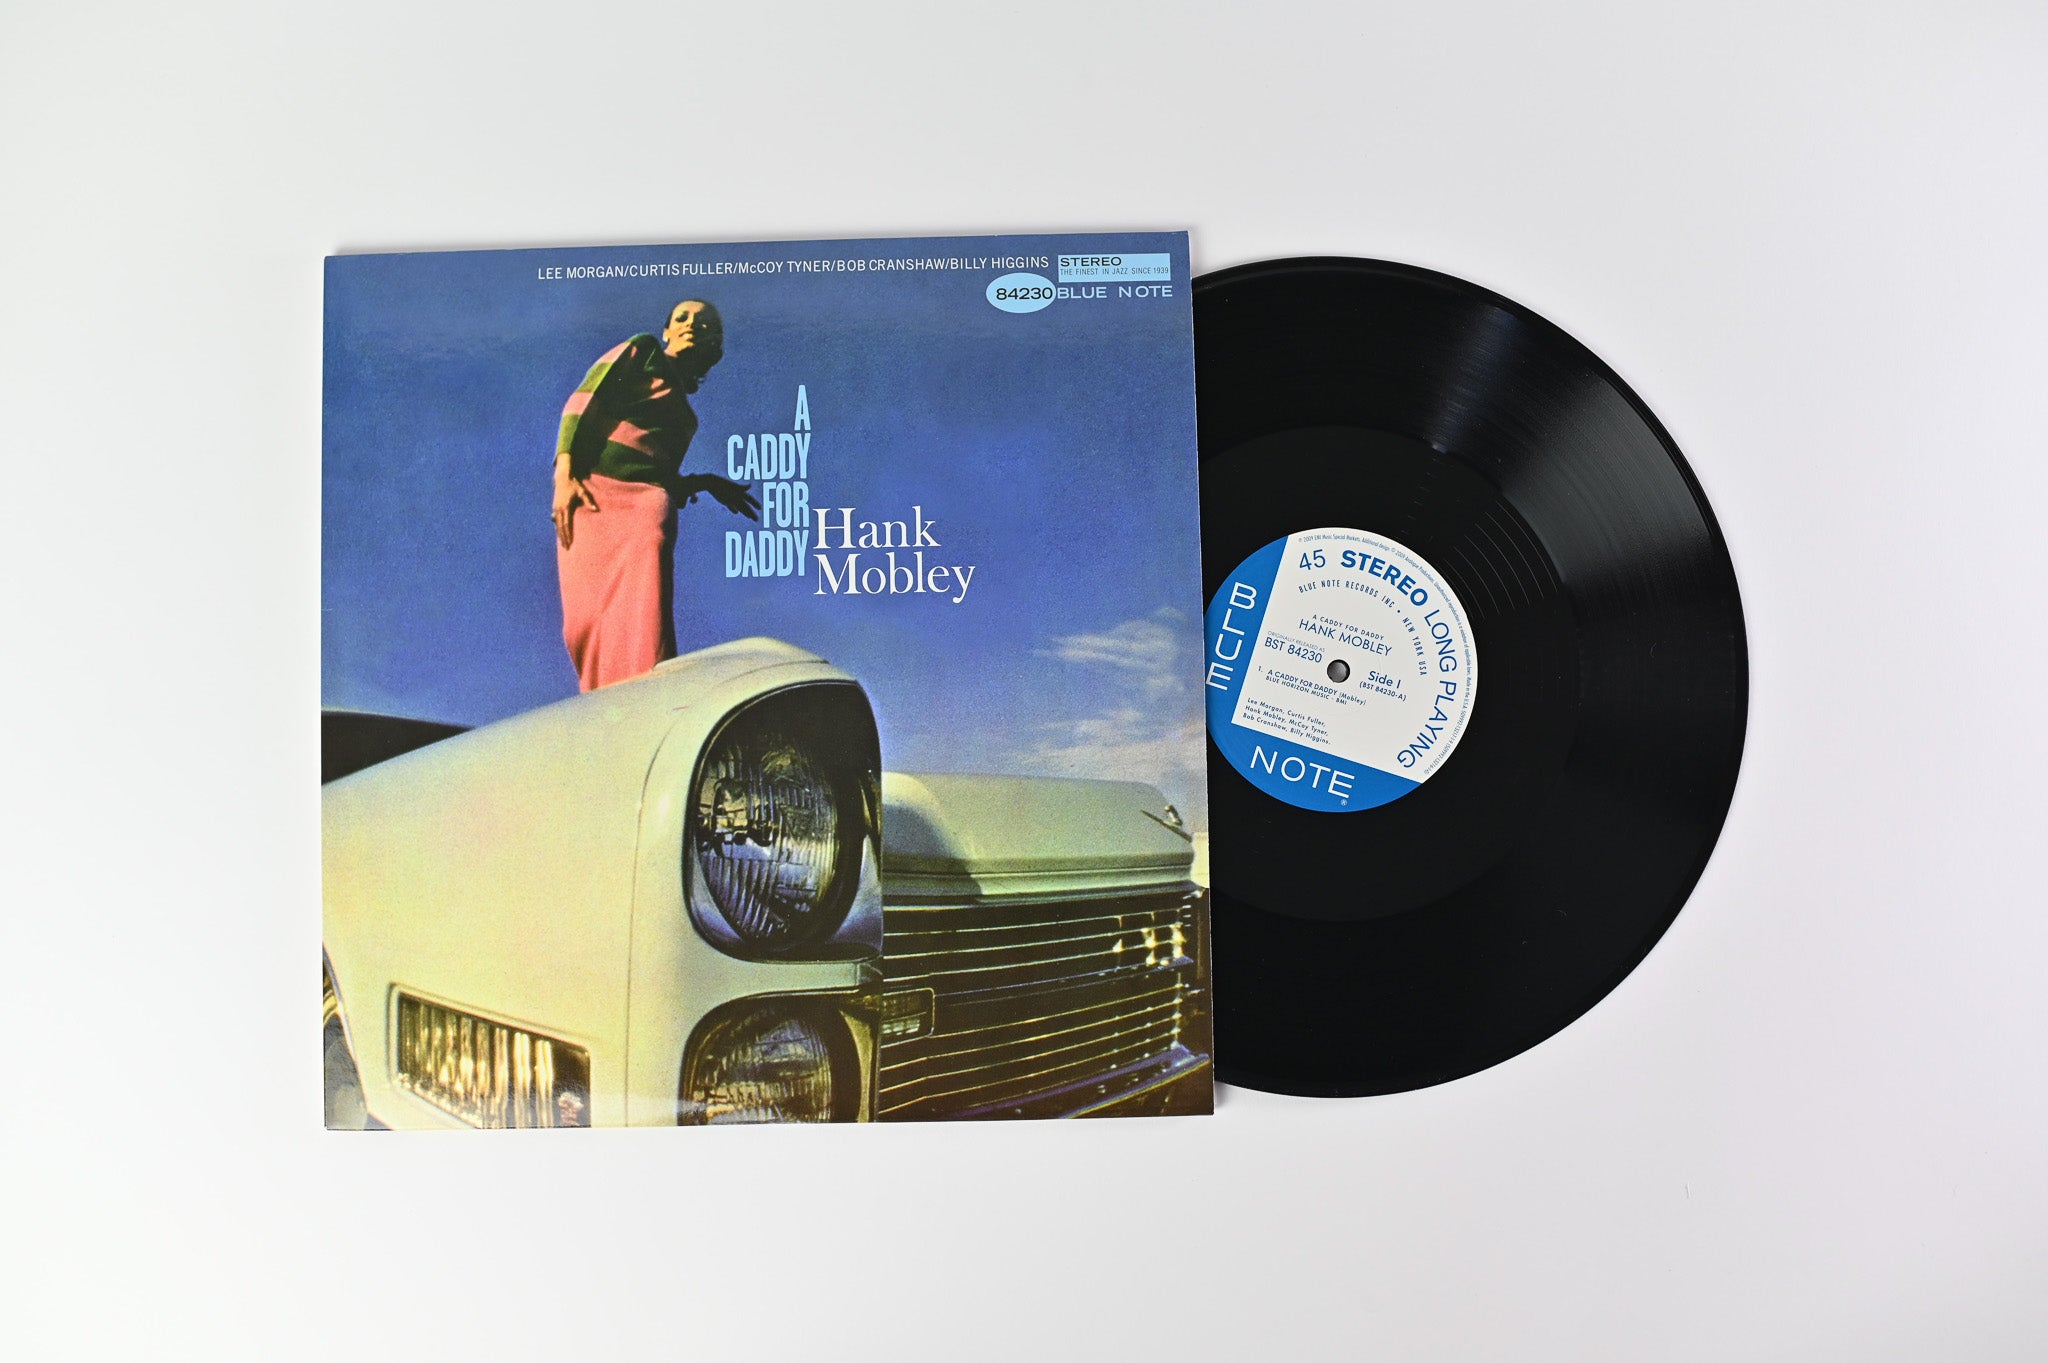 Hank Mobley - A Caddy For Daddy on Blue Note Analogue Productions Reissue Numbered 45 RPM